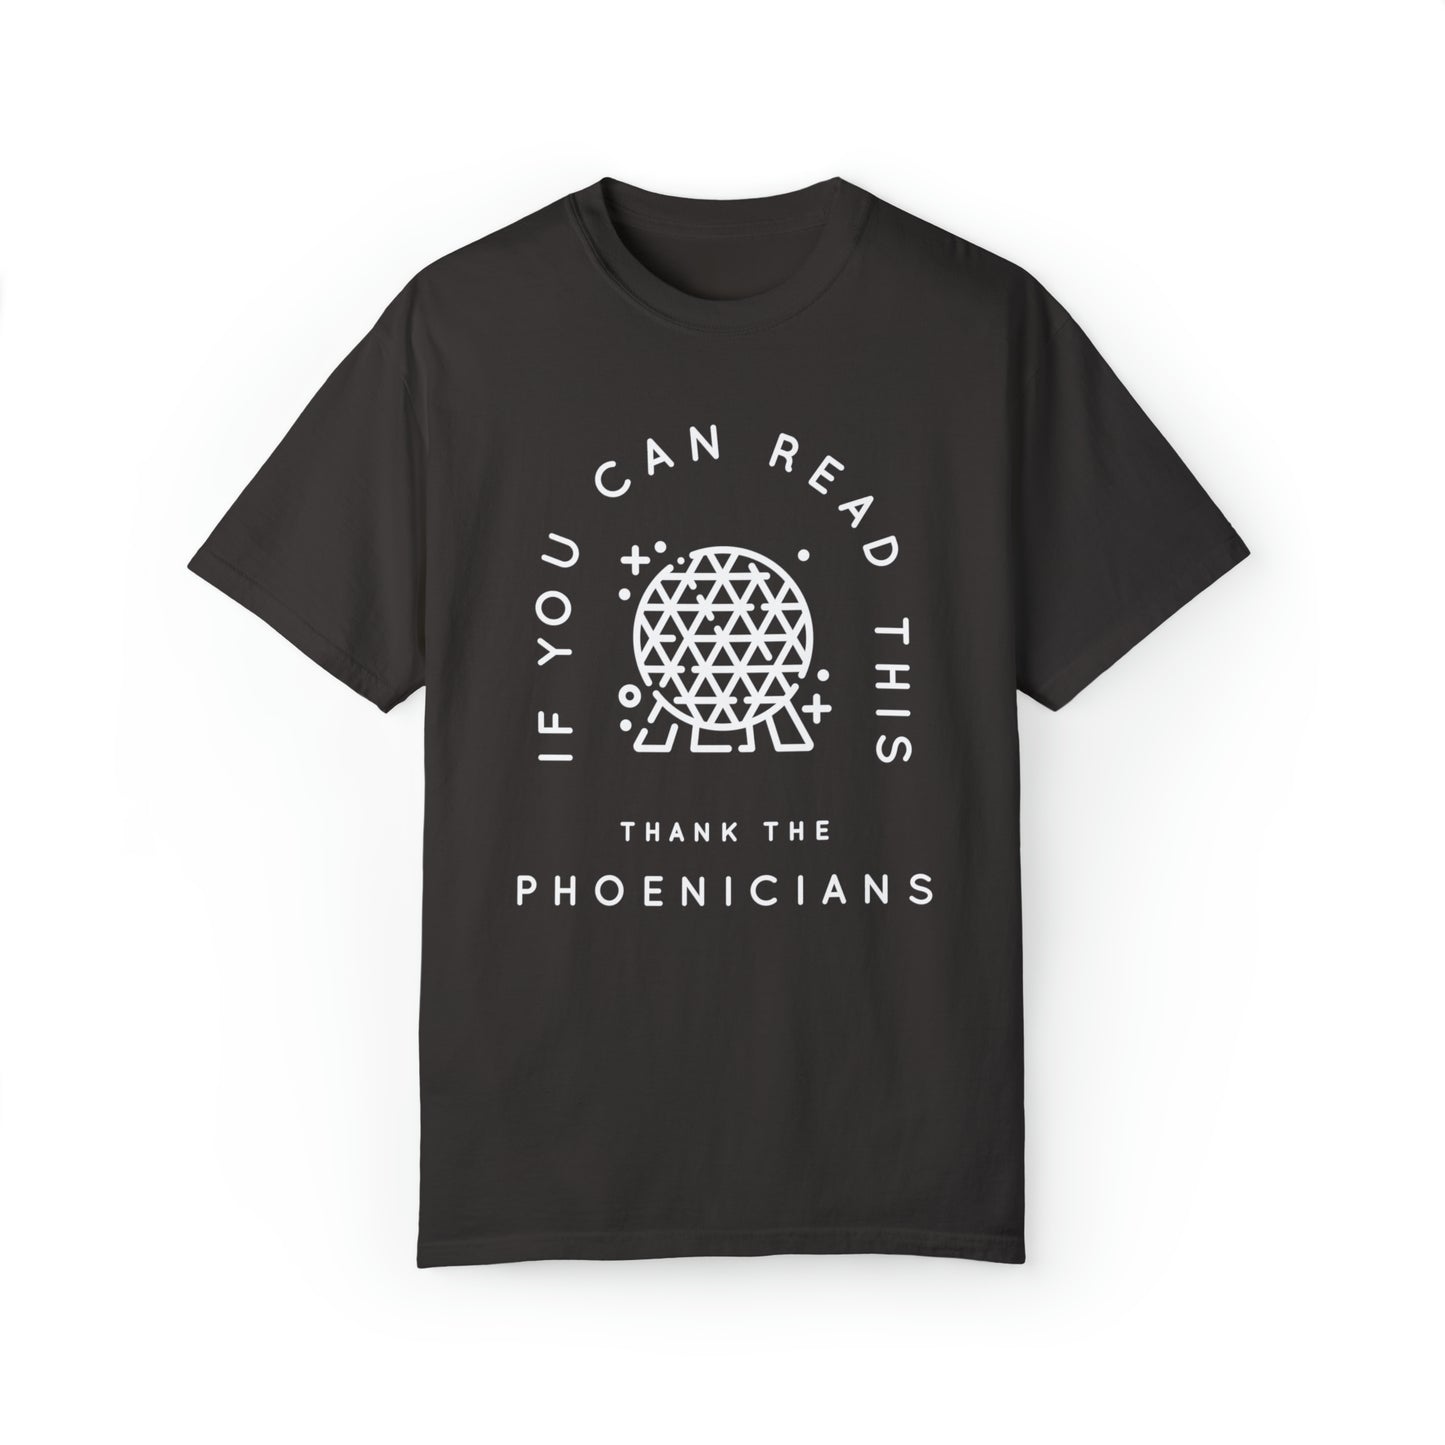 If You Can Read This Thank The Phoenicians Comfort Colors Unisex Garment-Dyed T-shirt